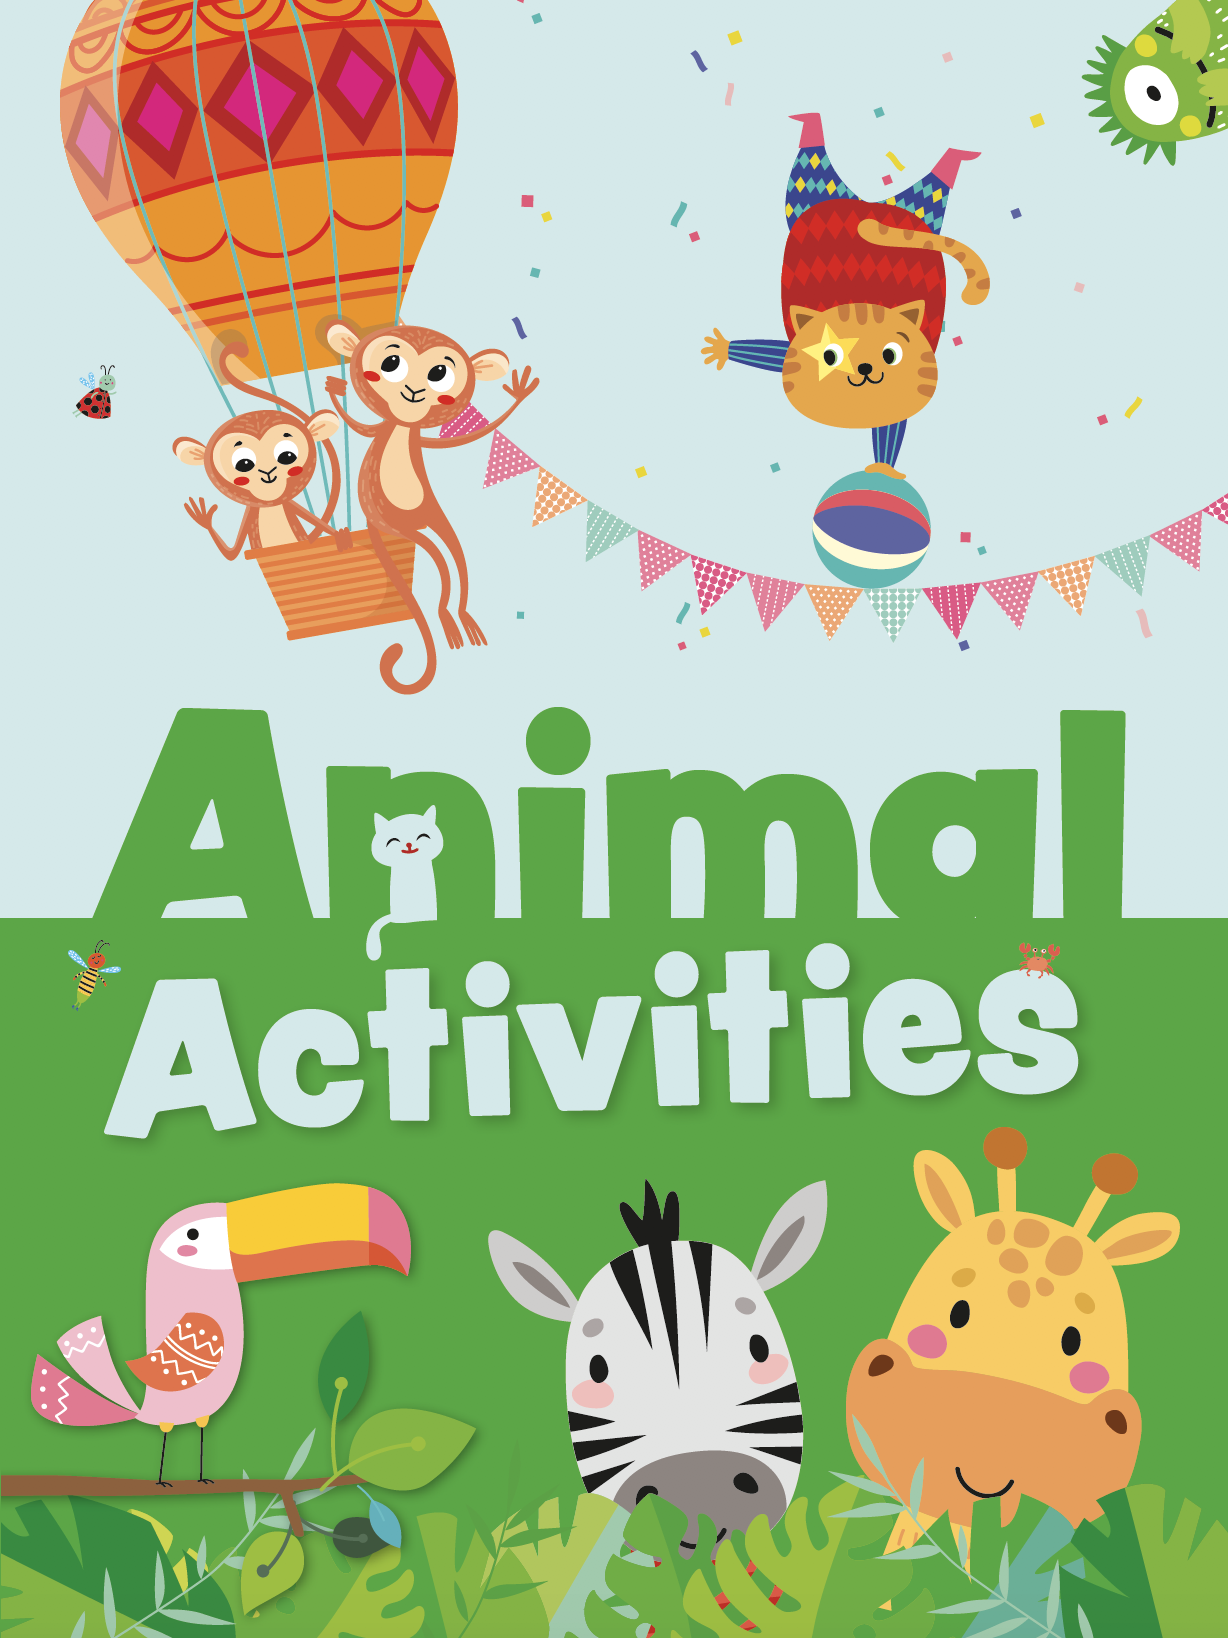 Animal Activities - cover 2